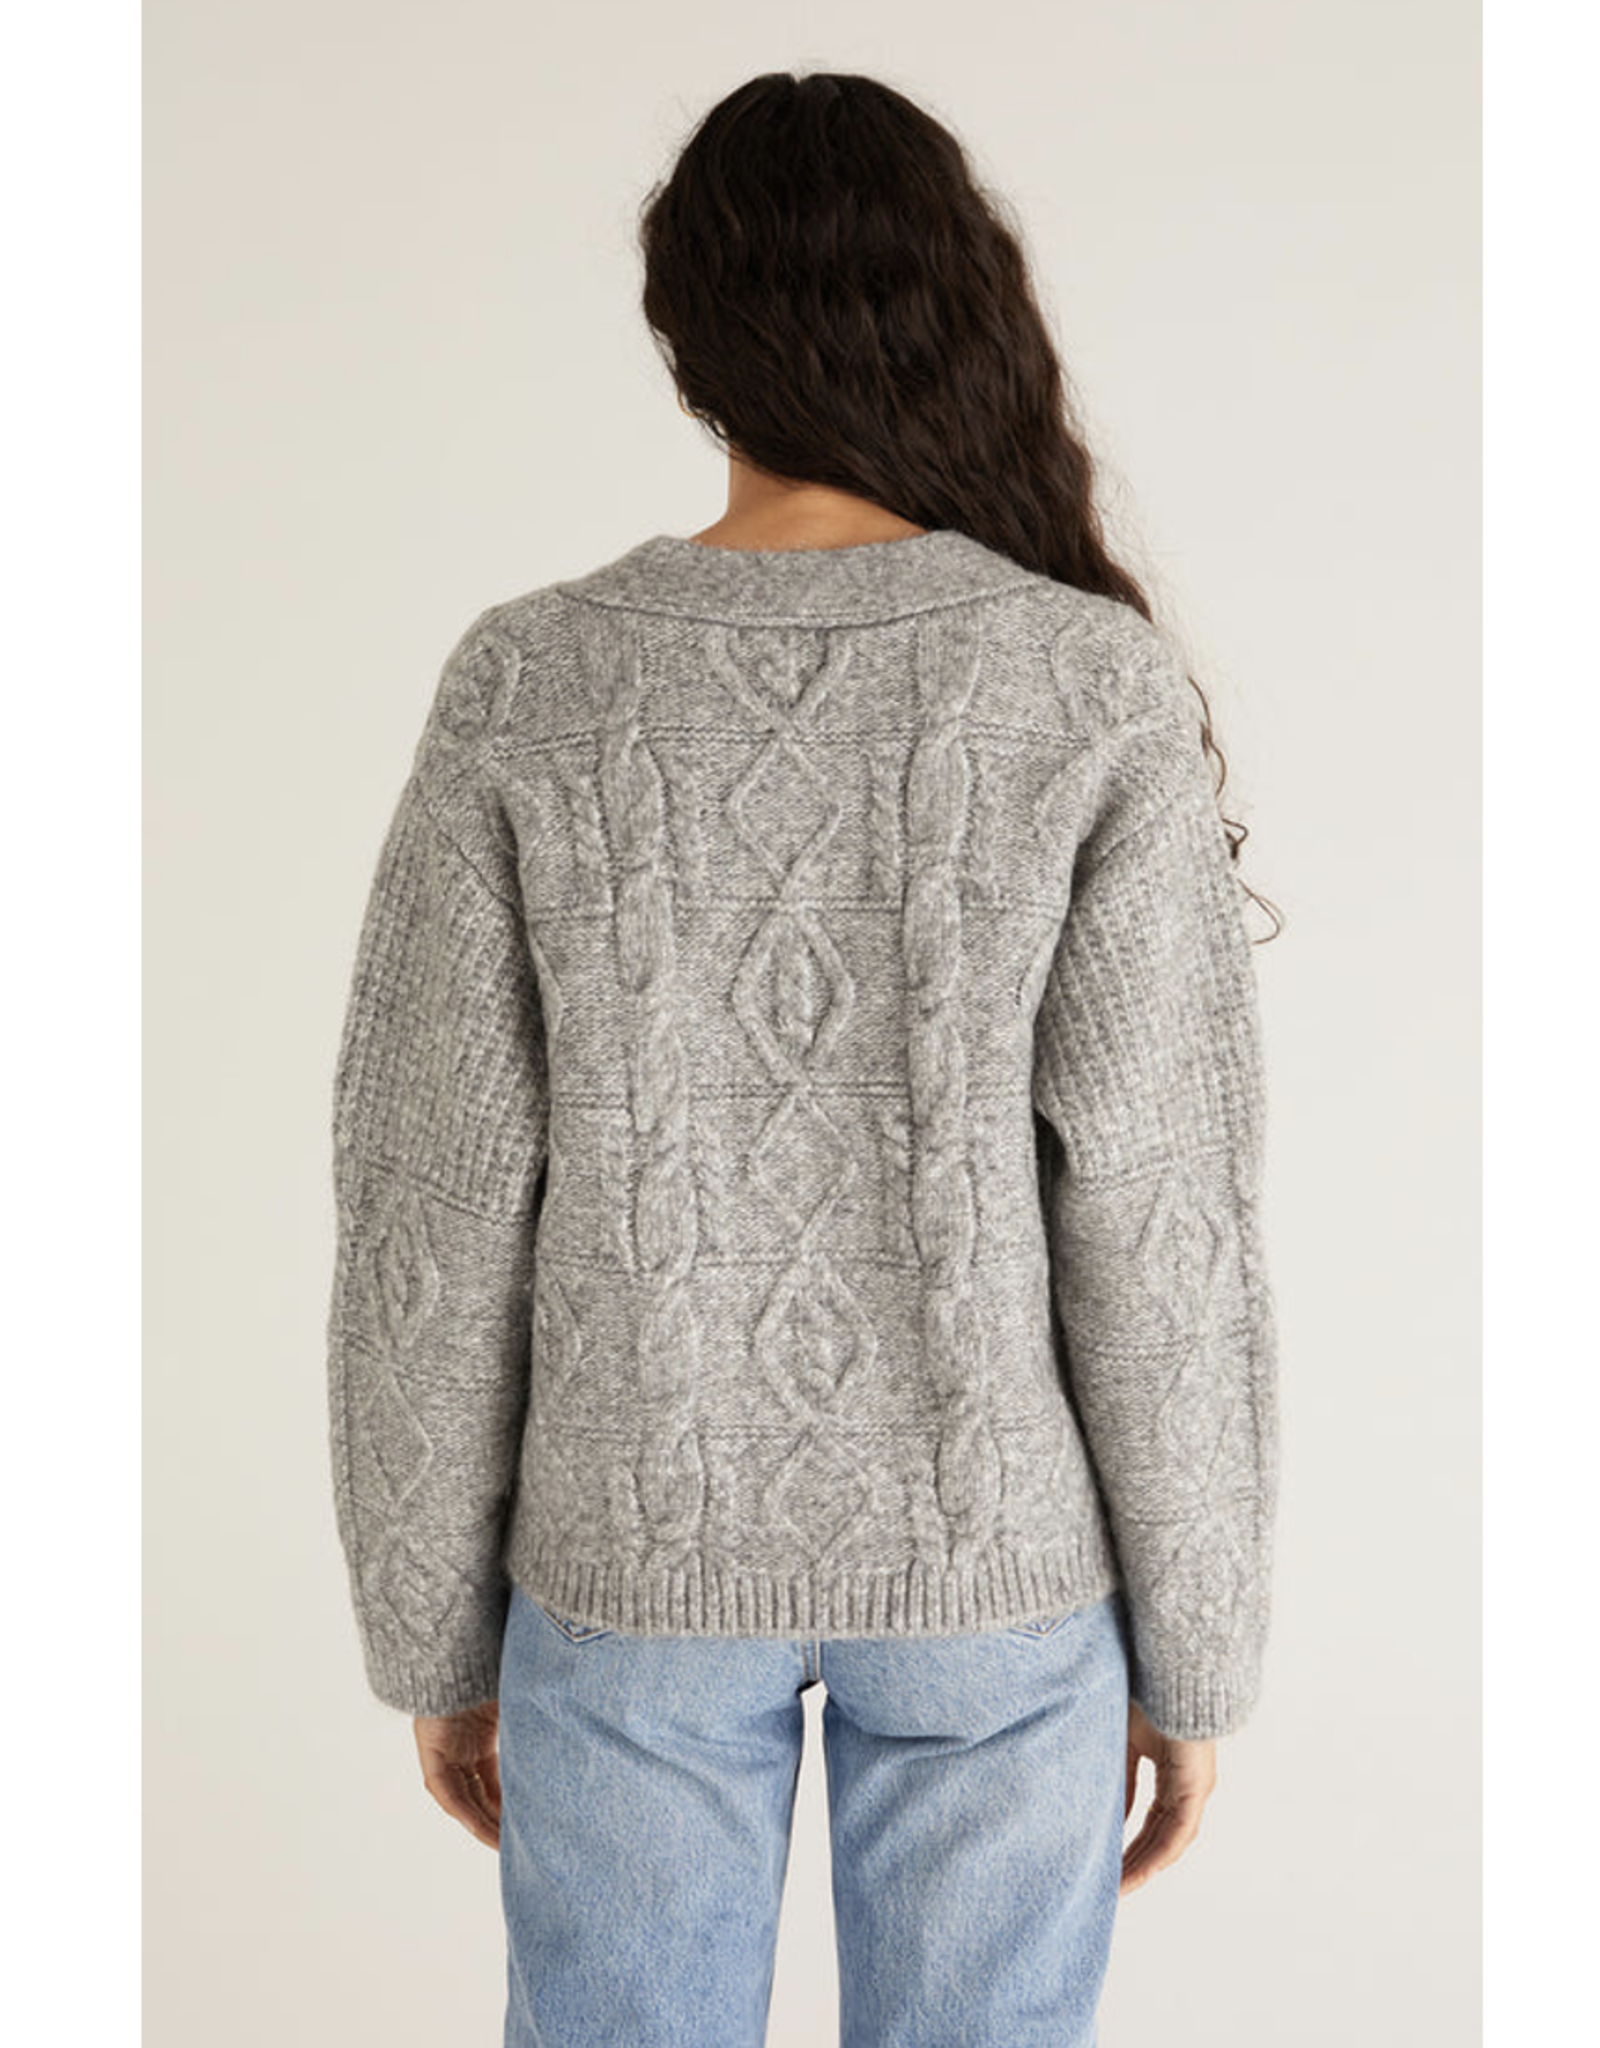 ZSupply Ryleigh Cable Knit Cardi